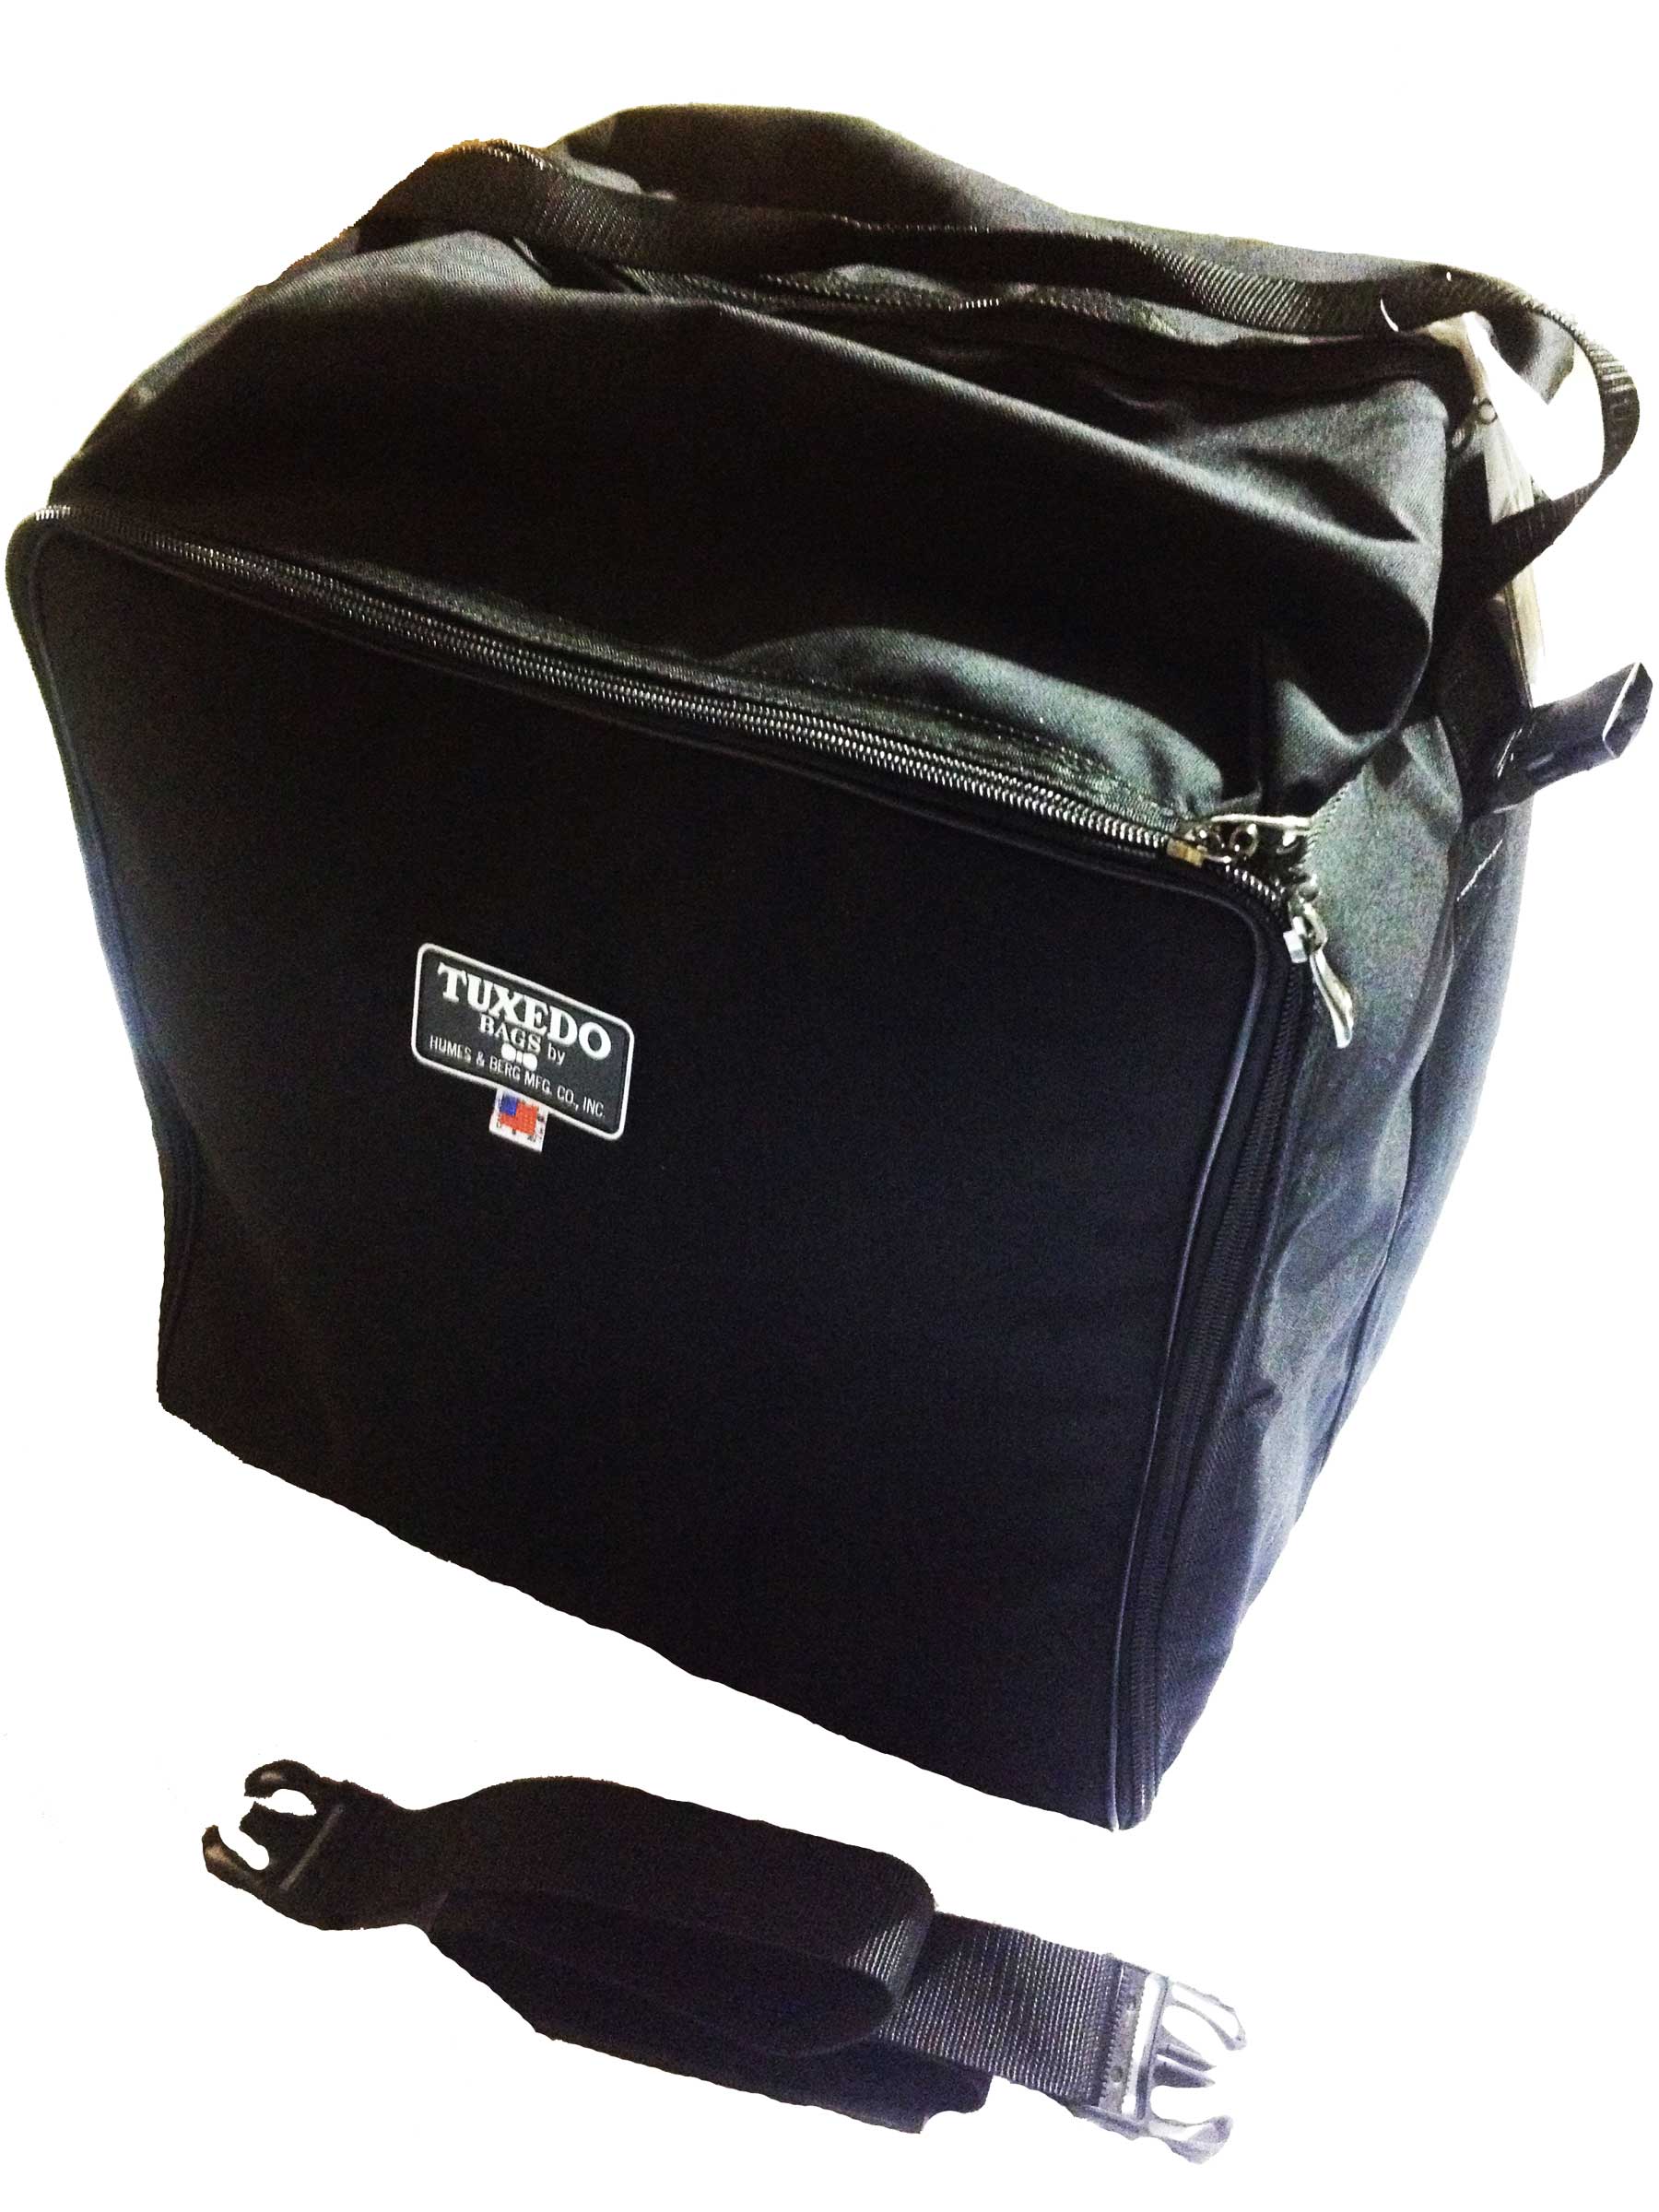 H&B Tuxedo Square 12 x 15 Inches Marching Snare Drum Bag